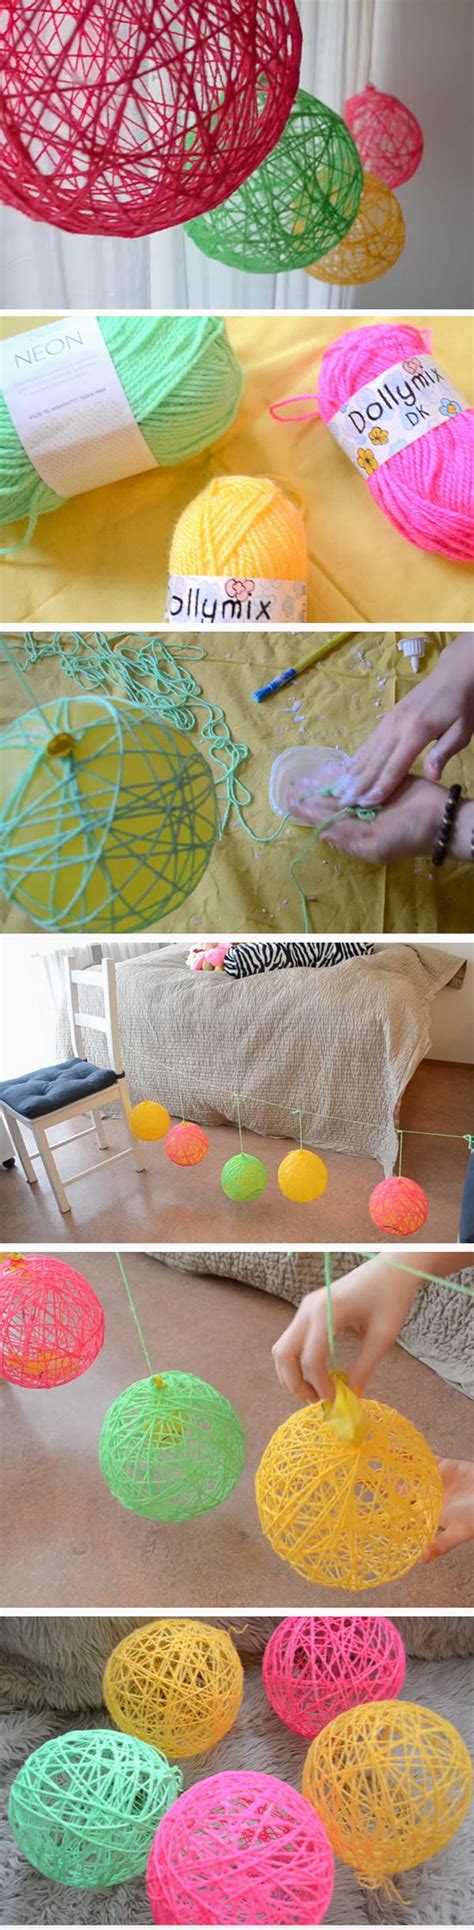 cute easy diy projects detail with full pictures ★★★★ all simple design